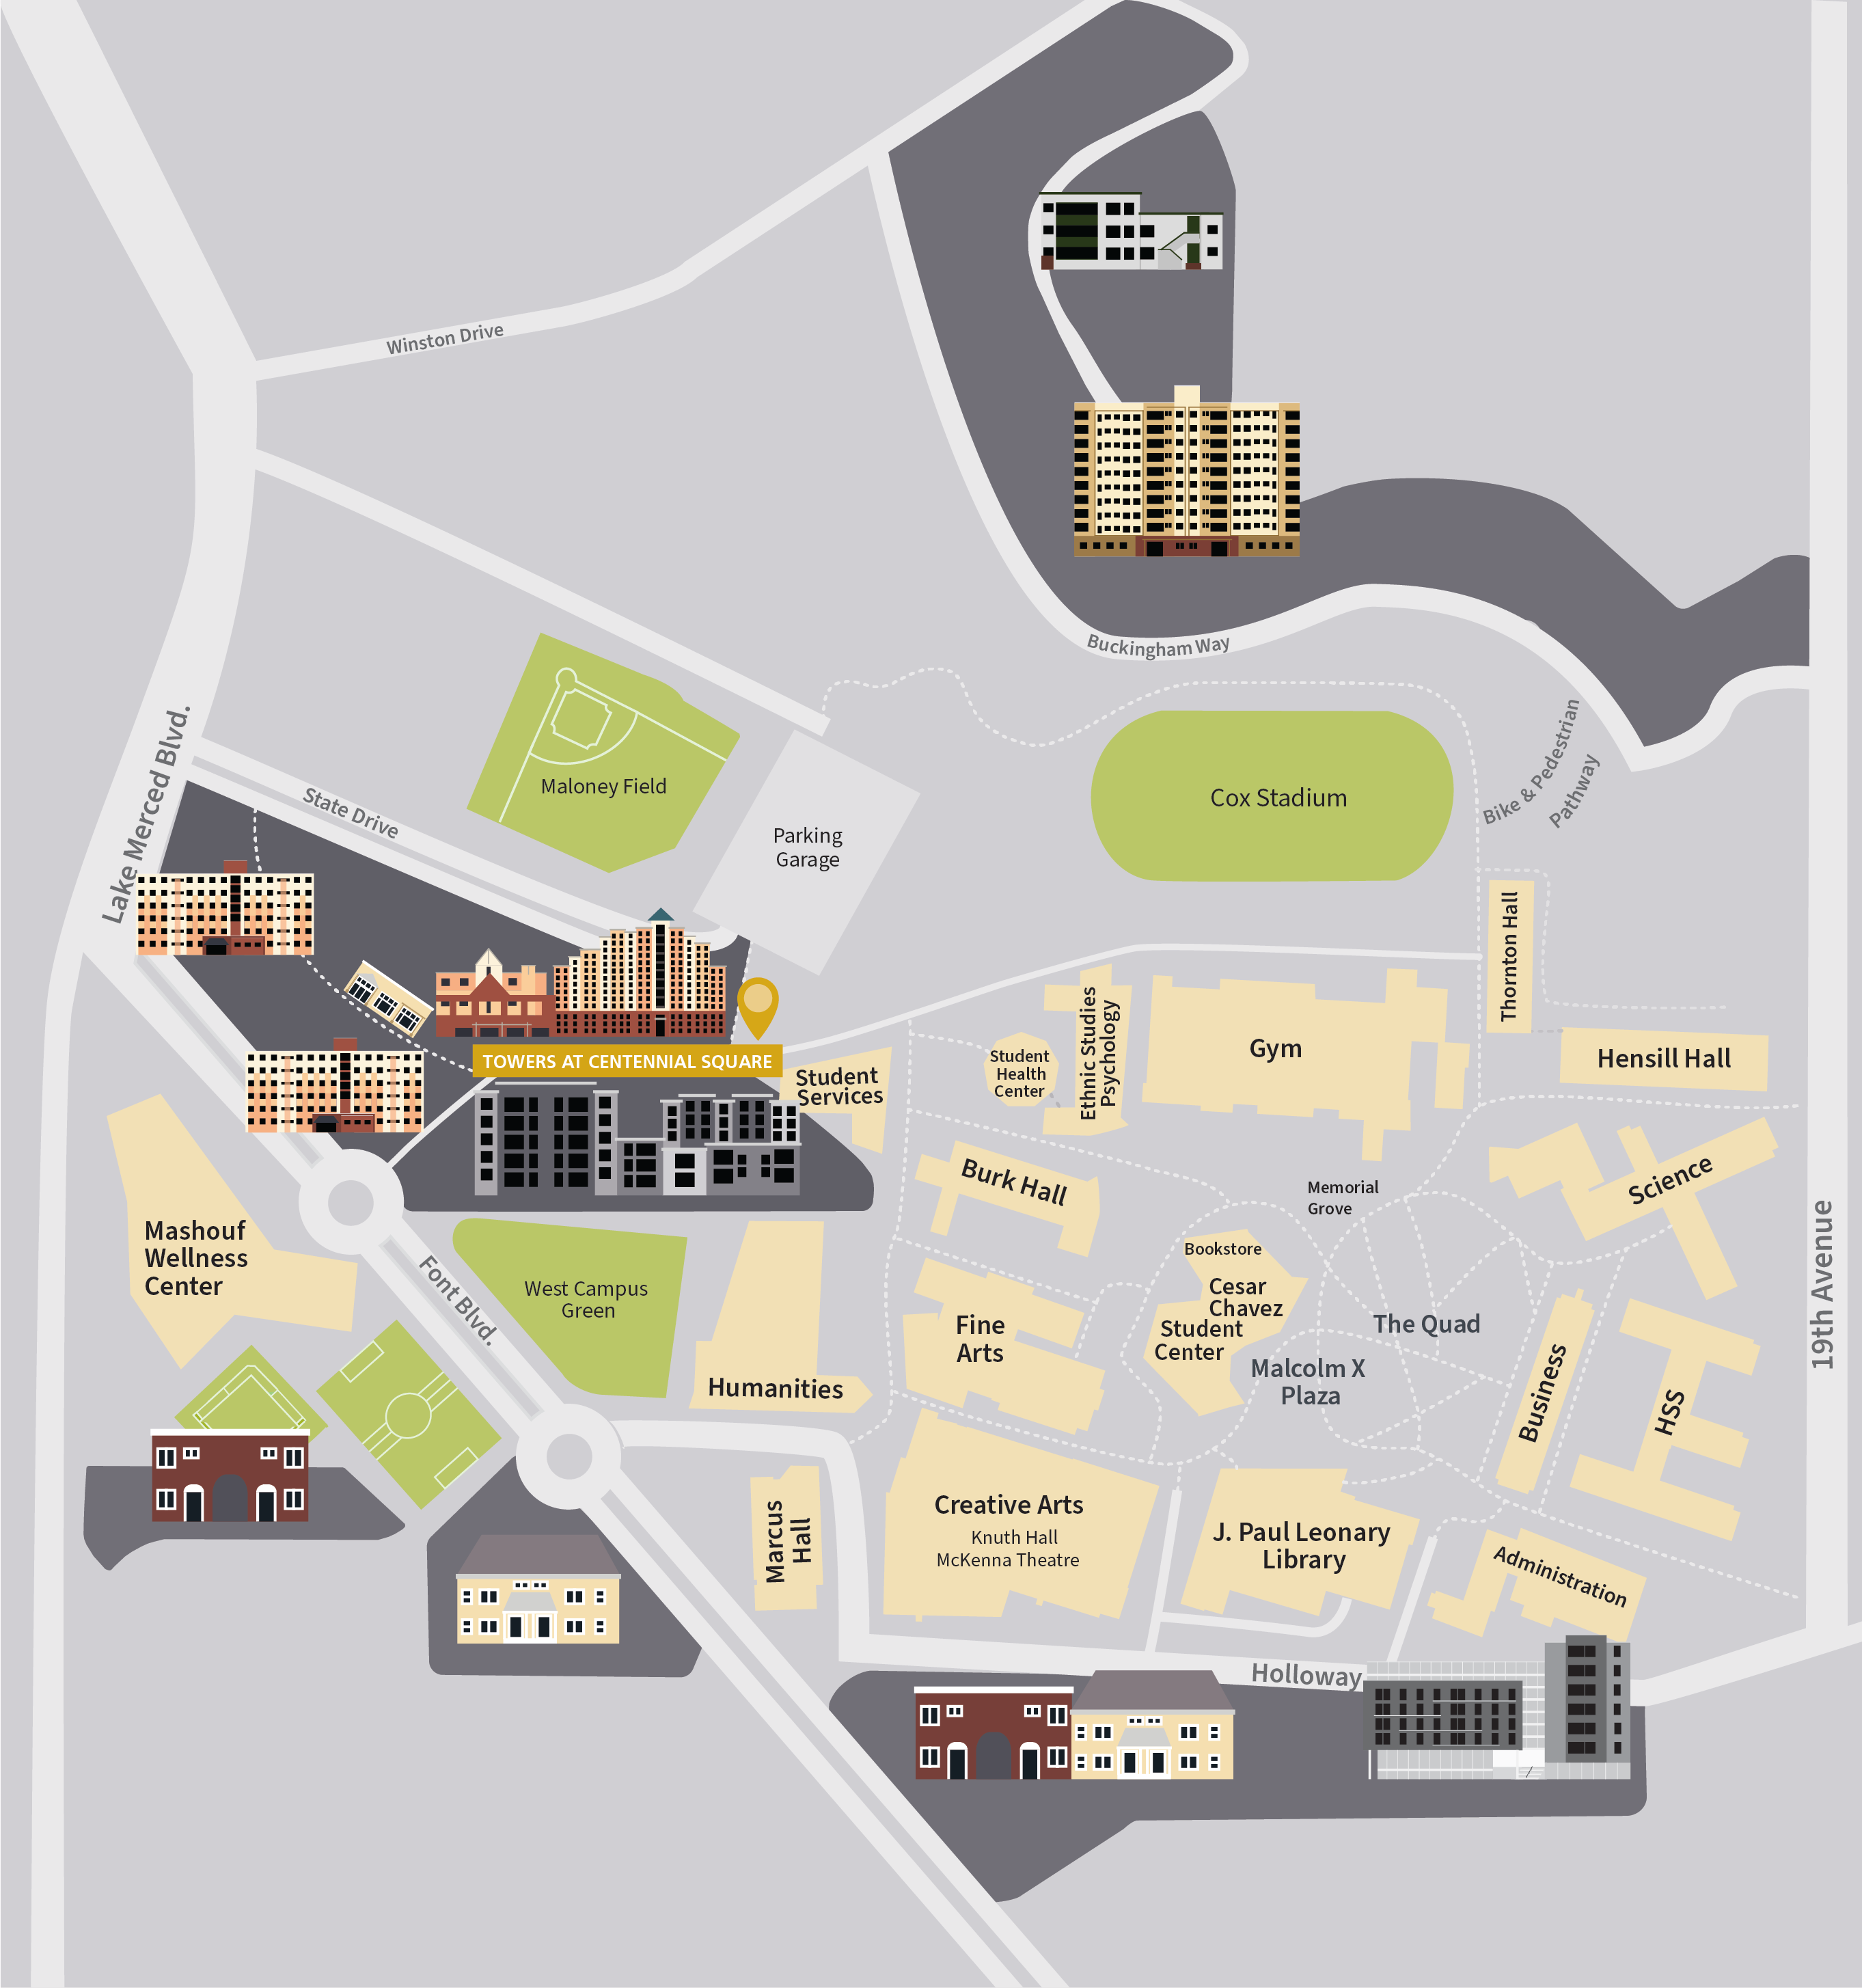 Towers at Centennial Square location map